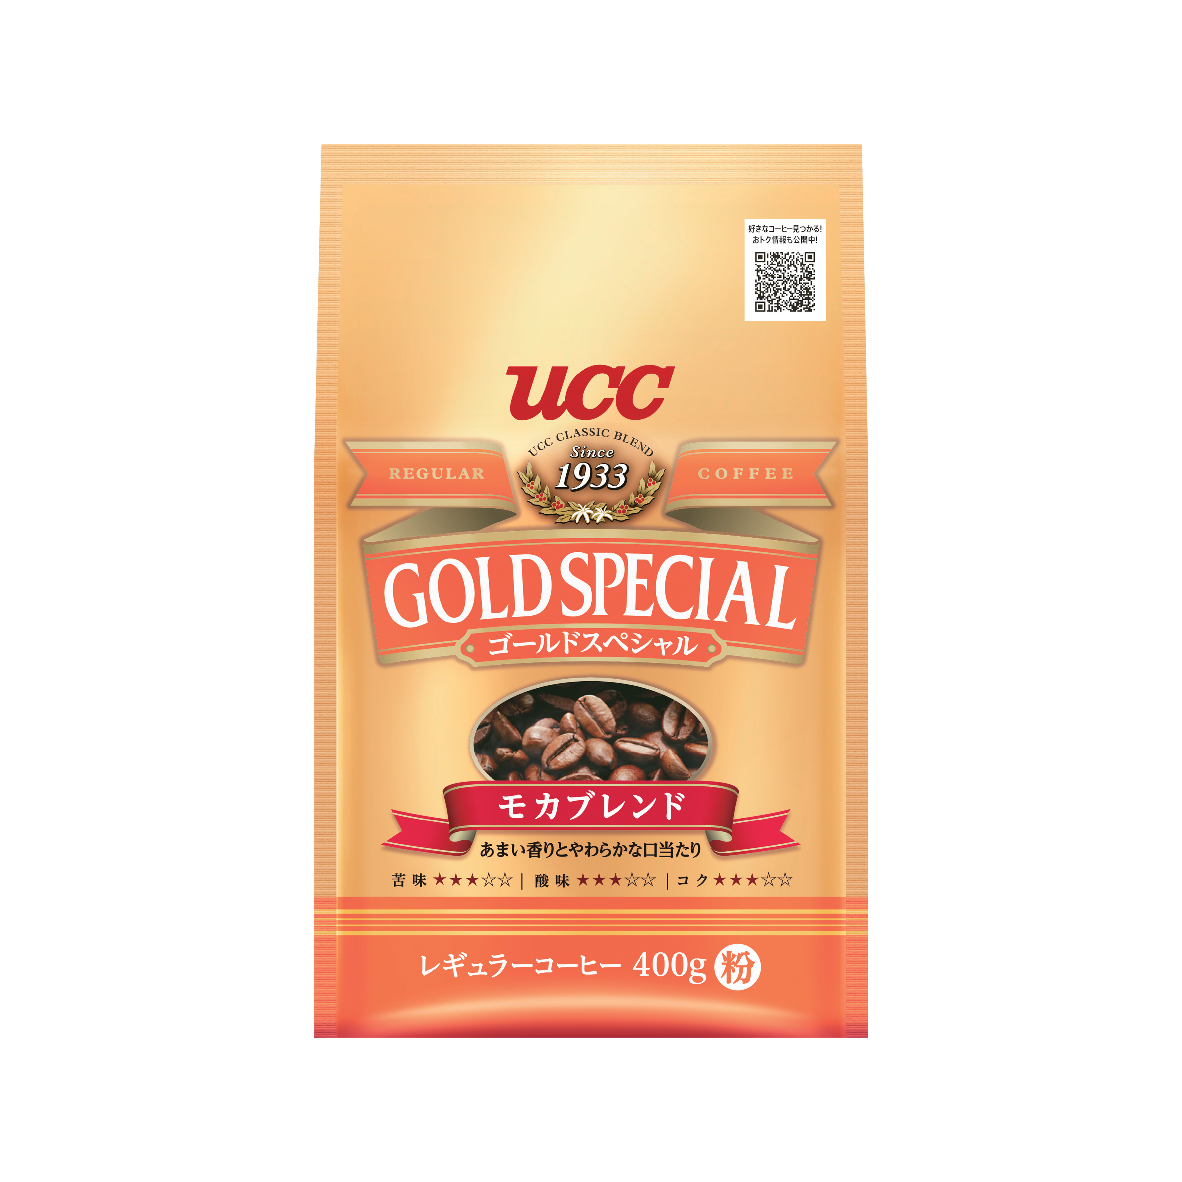 UCC Gold Special Mocha Blend Roasted Coffee